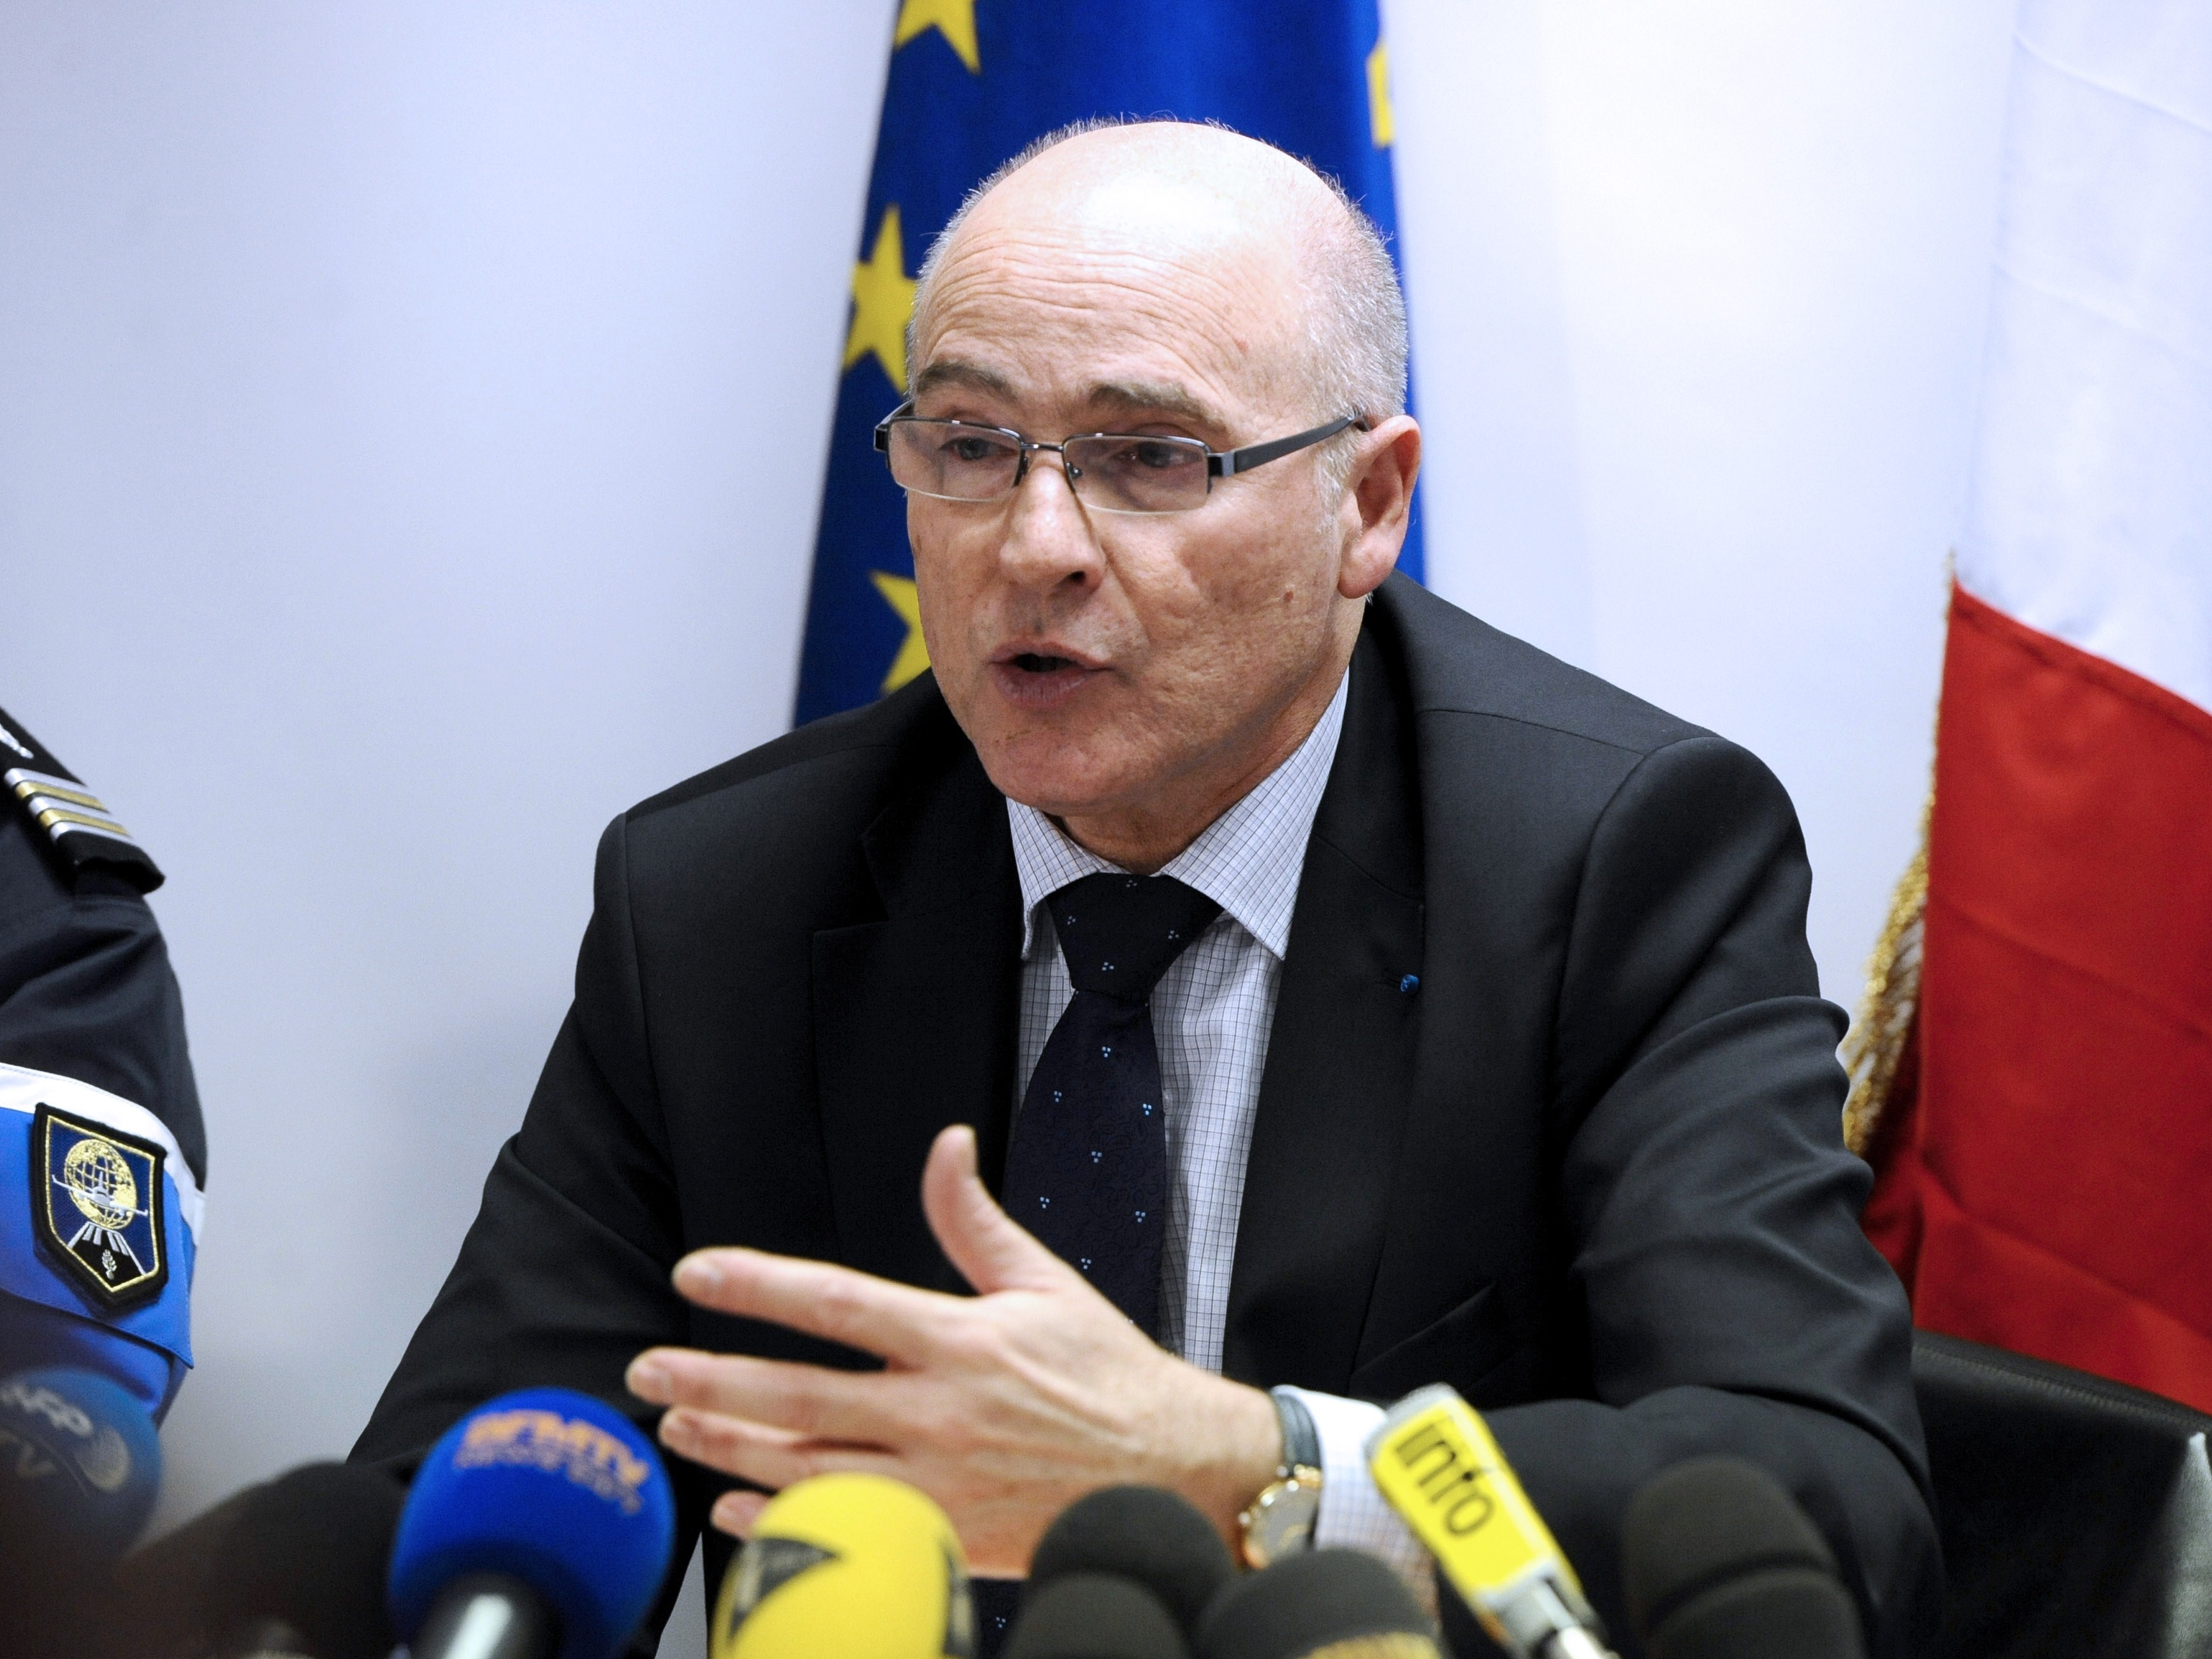 Marseille prosecutor Brice Robin speaks at a news conference Thursday at Marignane airport near Marseille, France. Robin said there is no evidence the Germanwings co-pilot's actions were "a terrorist act." Franck Pennant/AFP/Getty Images